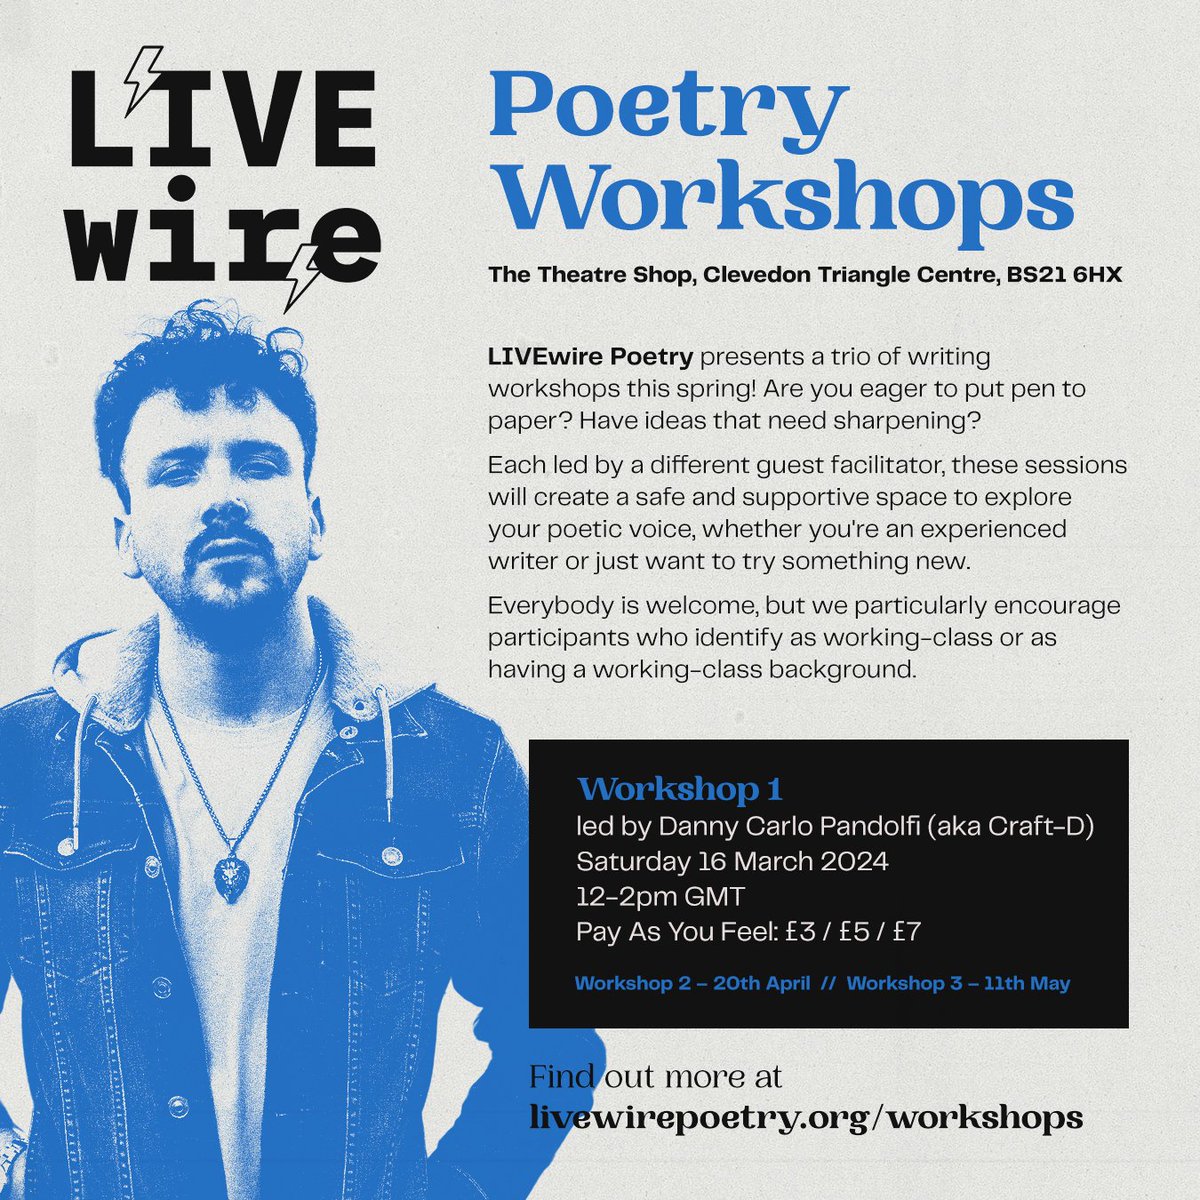 ✍️ 𝗧𝗵𝗶𝘀 𝗮𝗳𝘁𝗲𝗿𝗻𝗼𝗼𝗻 ✍️ Final call for this afternoon's poetry workshop with Danny Carlo Pandolfi, aka @CraftDRap! It's at @TheatreShop1 in Clevedon from 12-2. All are welcome, and tickets are available below from £3 🎟 bit.ly/4acwPBc